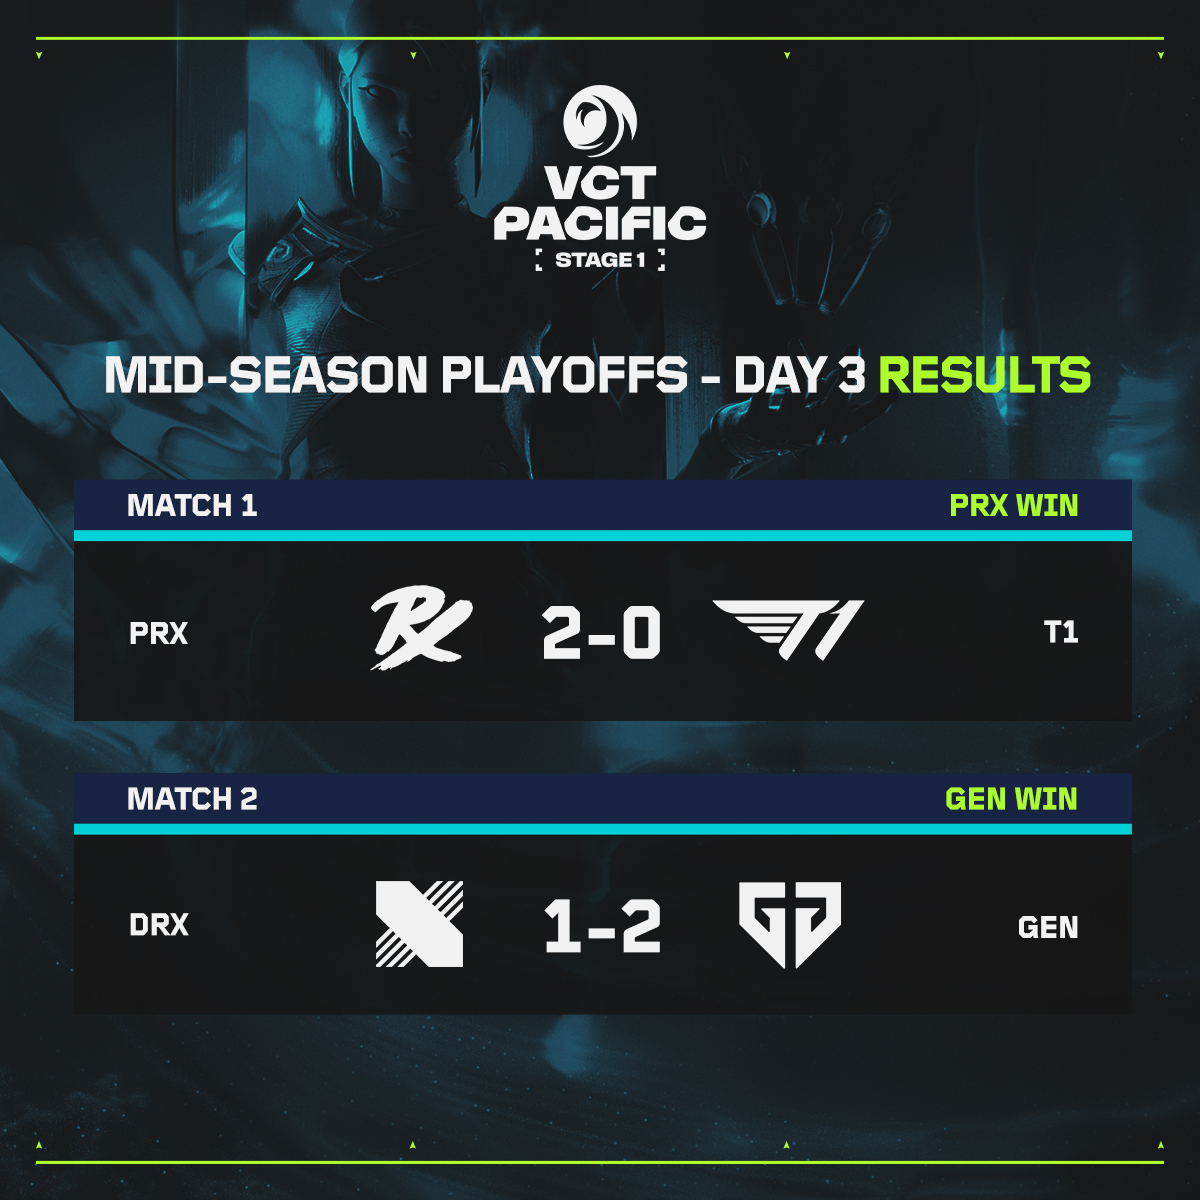 The results of #VCTPacific Mid-Season Playoffs Day 3. @pprxteam goes to the Grand Finals while @geng_gold books a ticket to Shanghai! #VCTPacific